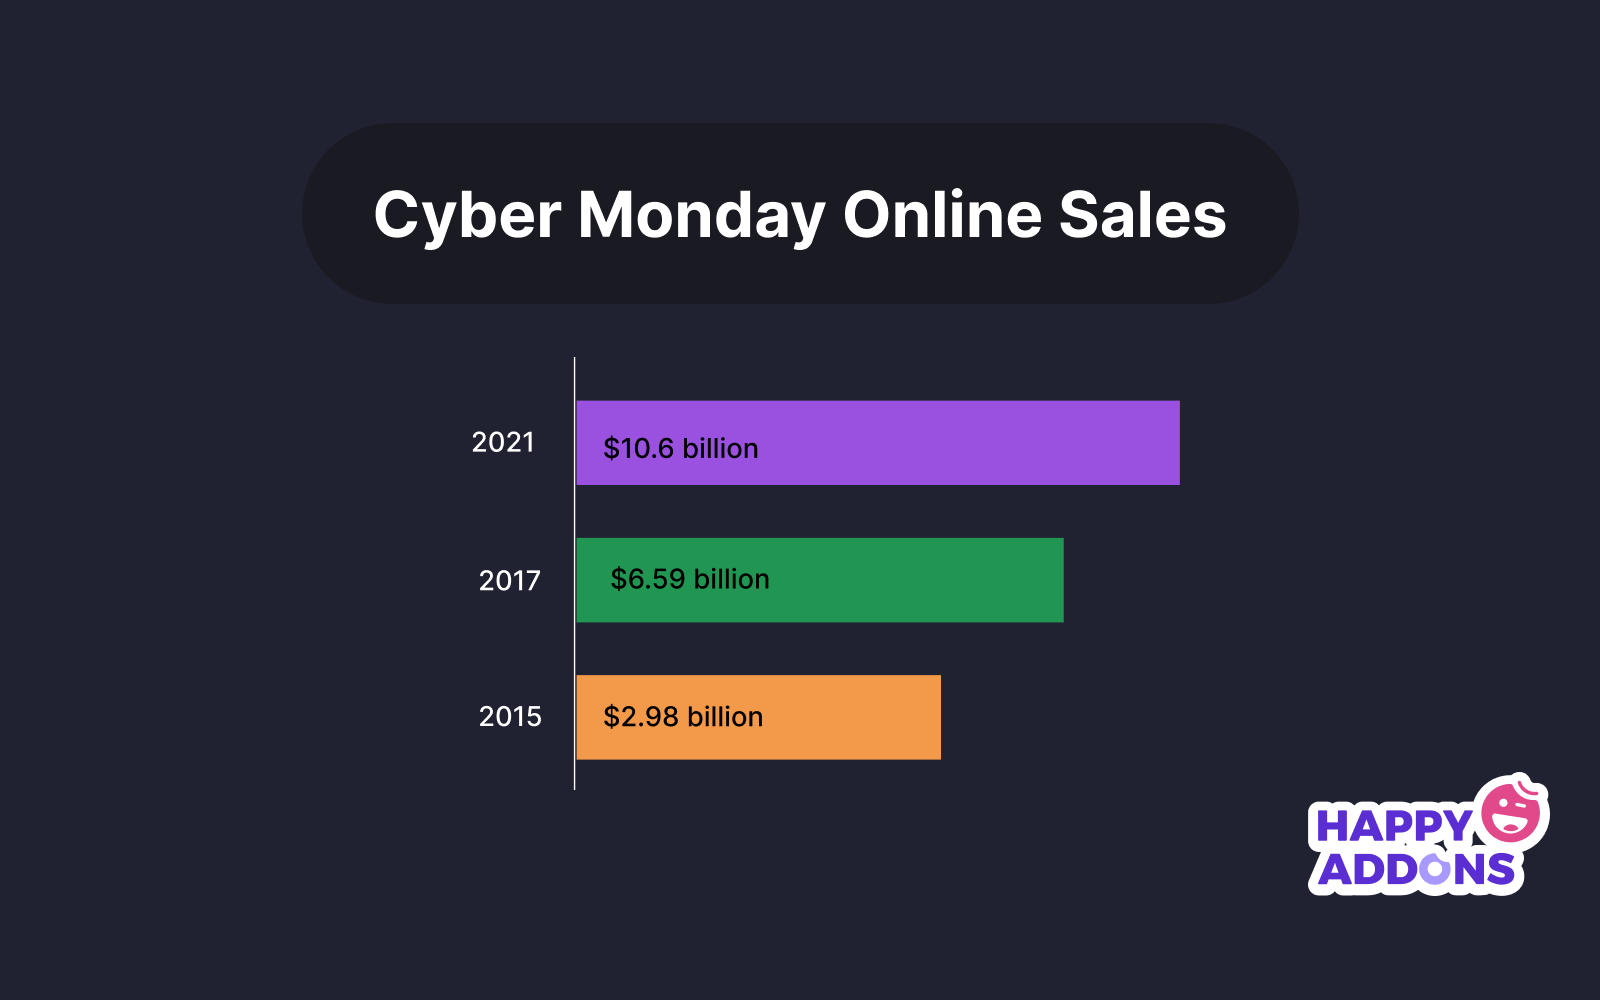 Statistics on Cyber Monday Sales over the Last Few Years